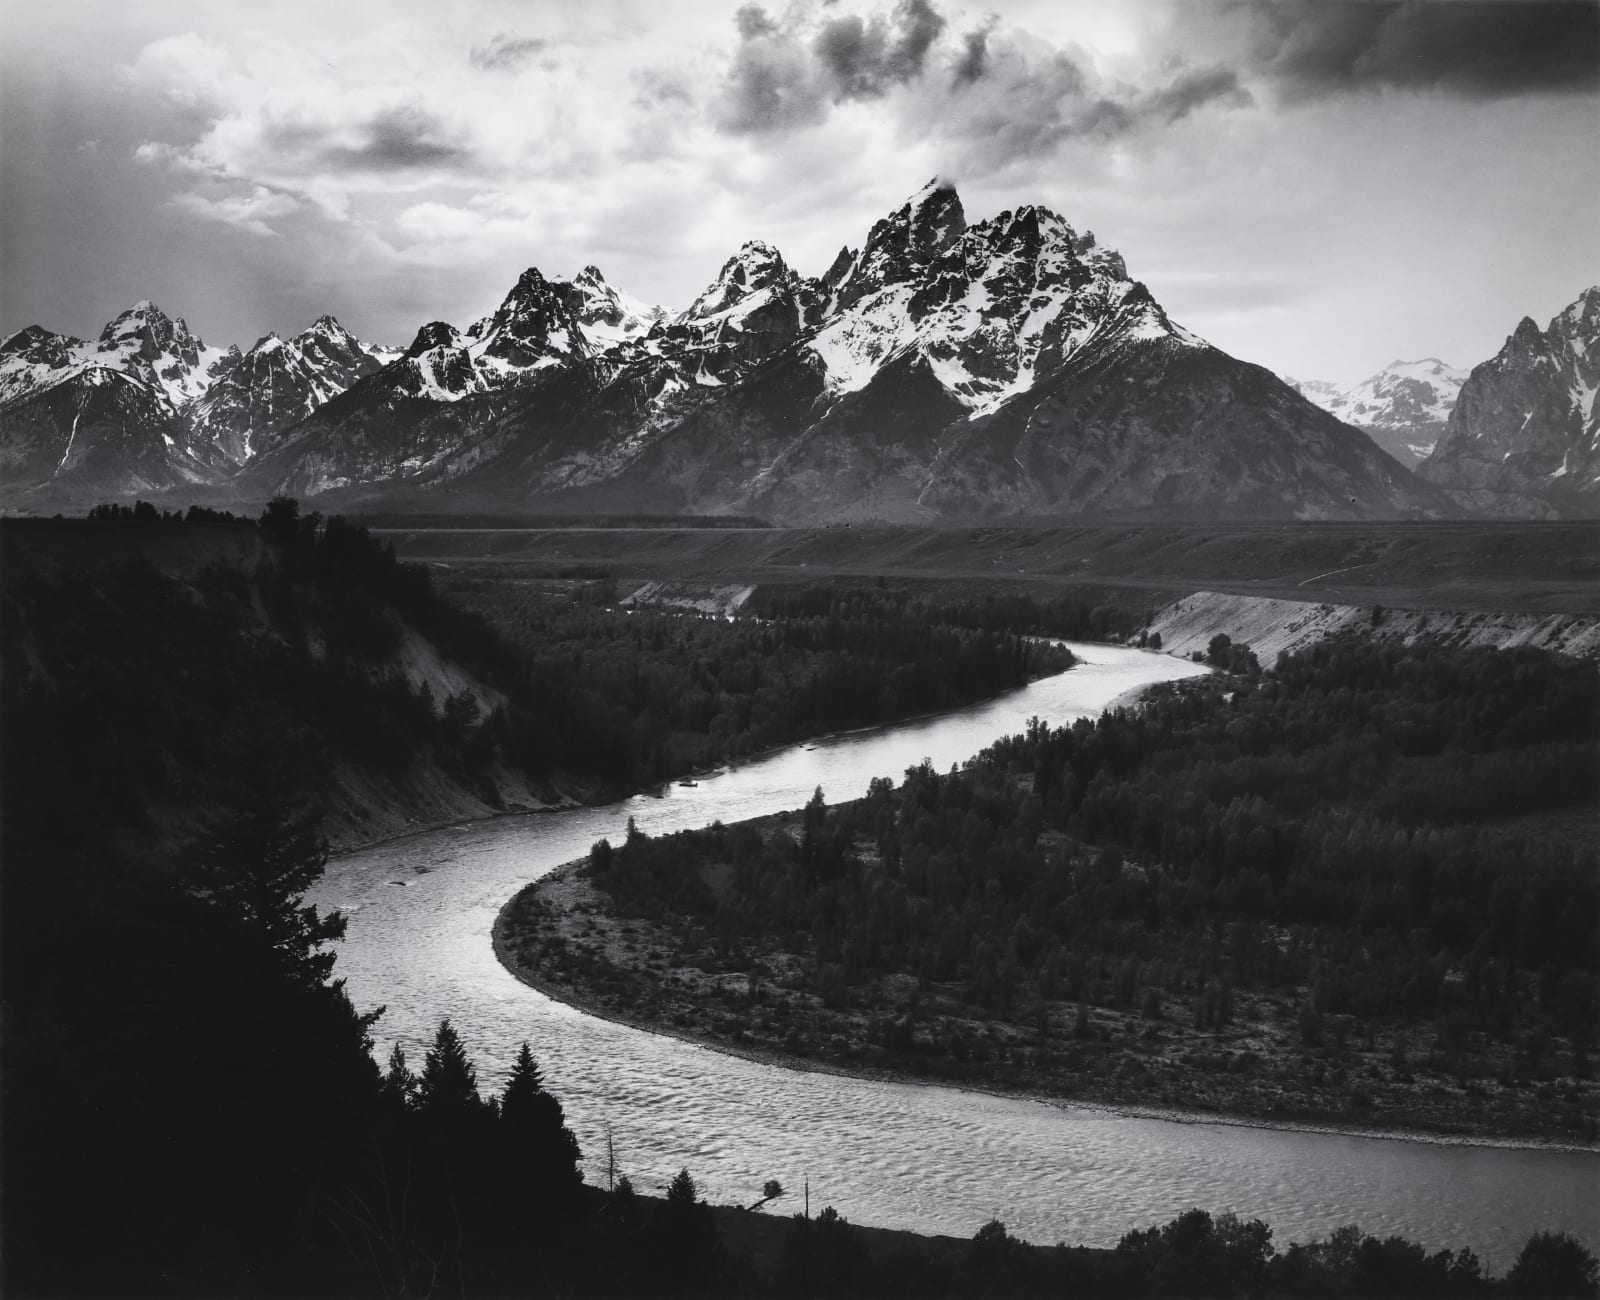 Ansel Adams, The Grand Tetons and Snake River, Grand Teton National Park,  1942 | Seagrave Gallery